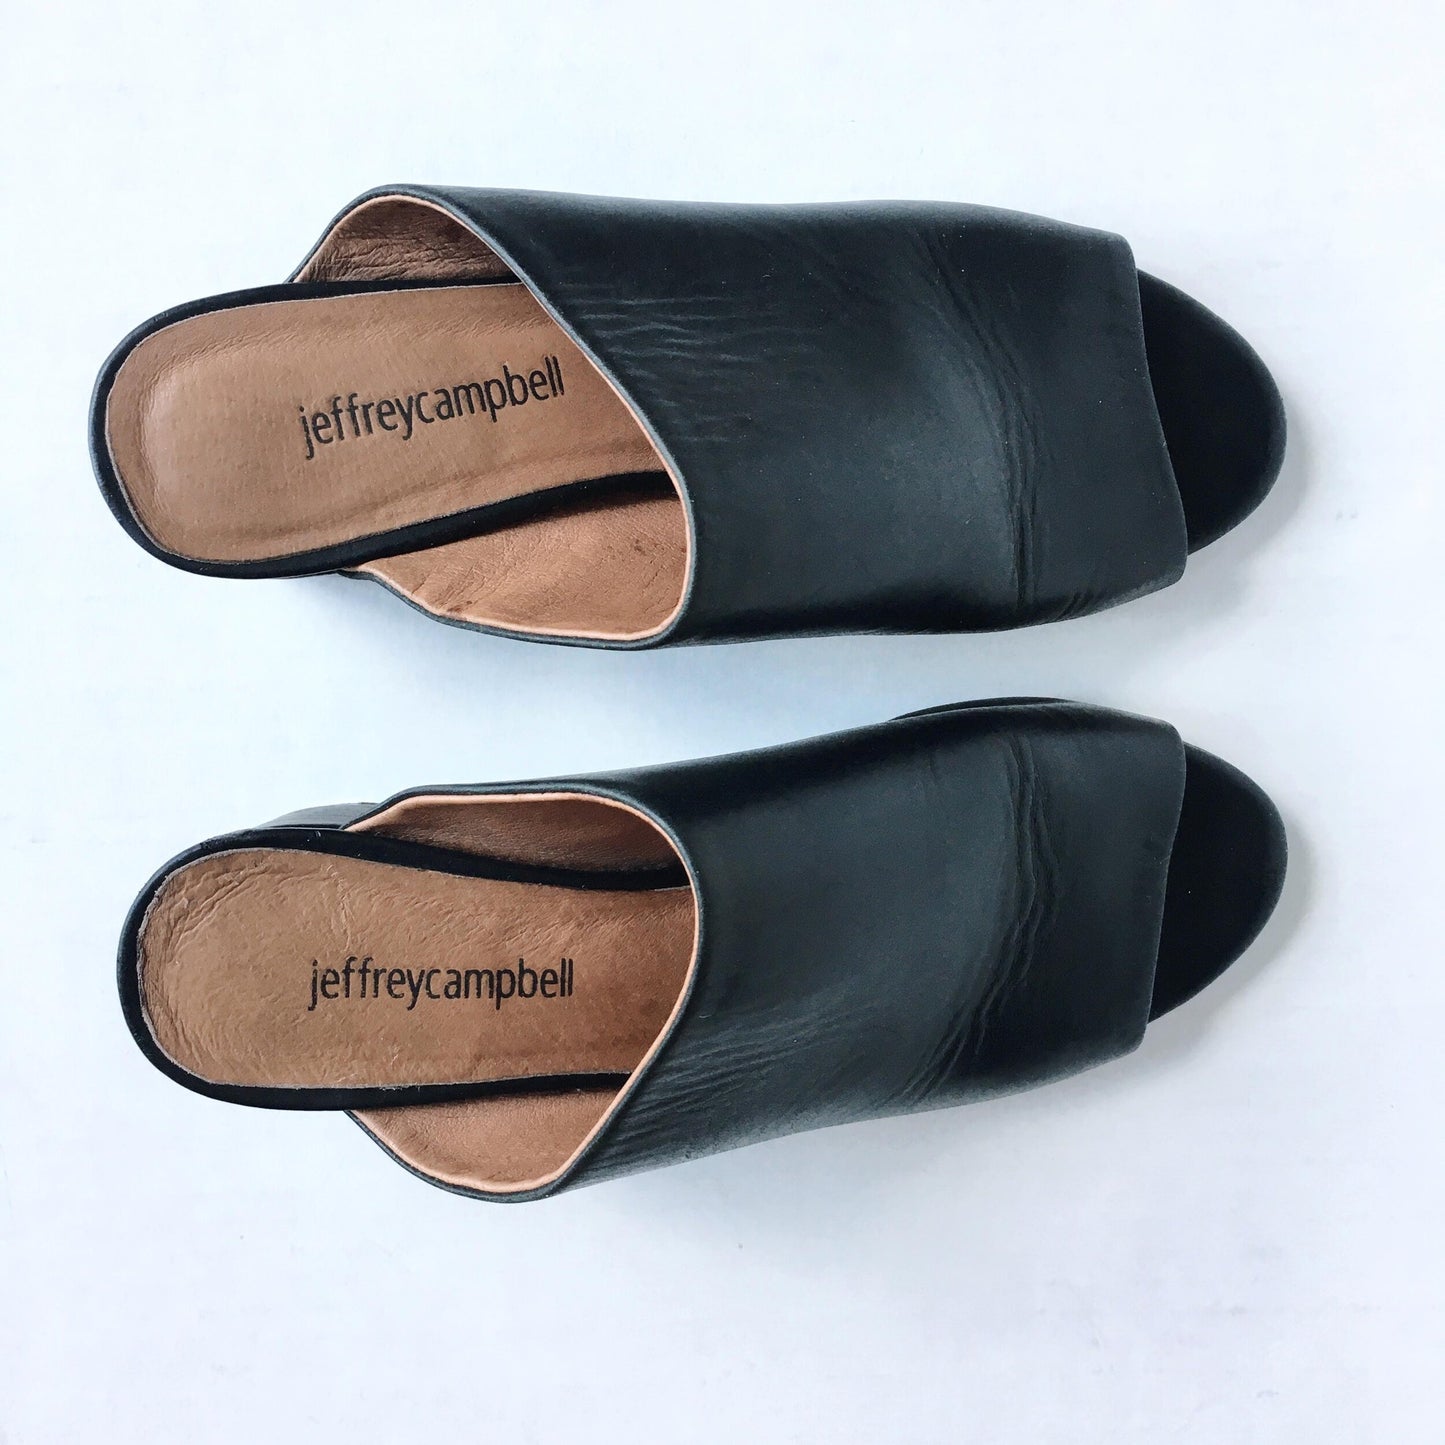 Jeffrey Campbell x UO Darnley leather Mule - size 6